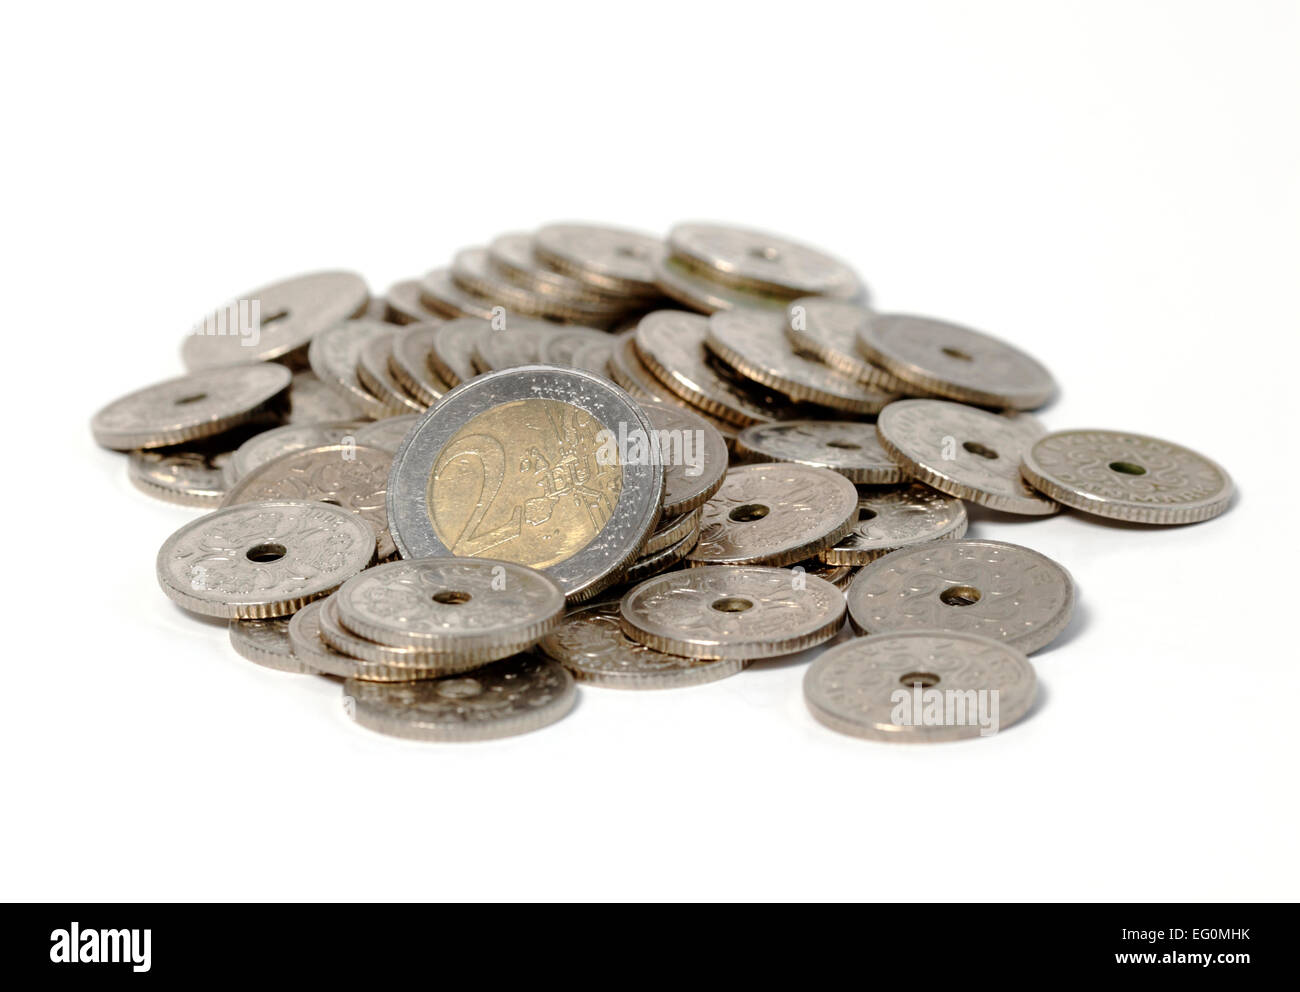 Euros balancing in the midst of Danish Kroner. A 2 Euro coin in the midst of Danish one Krone pieces on white. Stock Photo